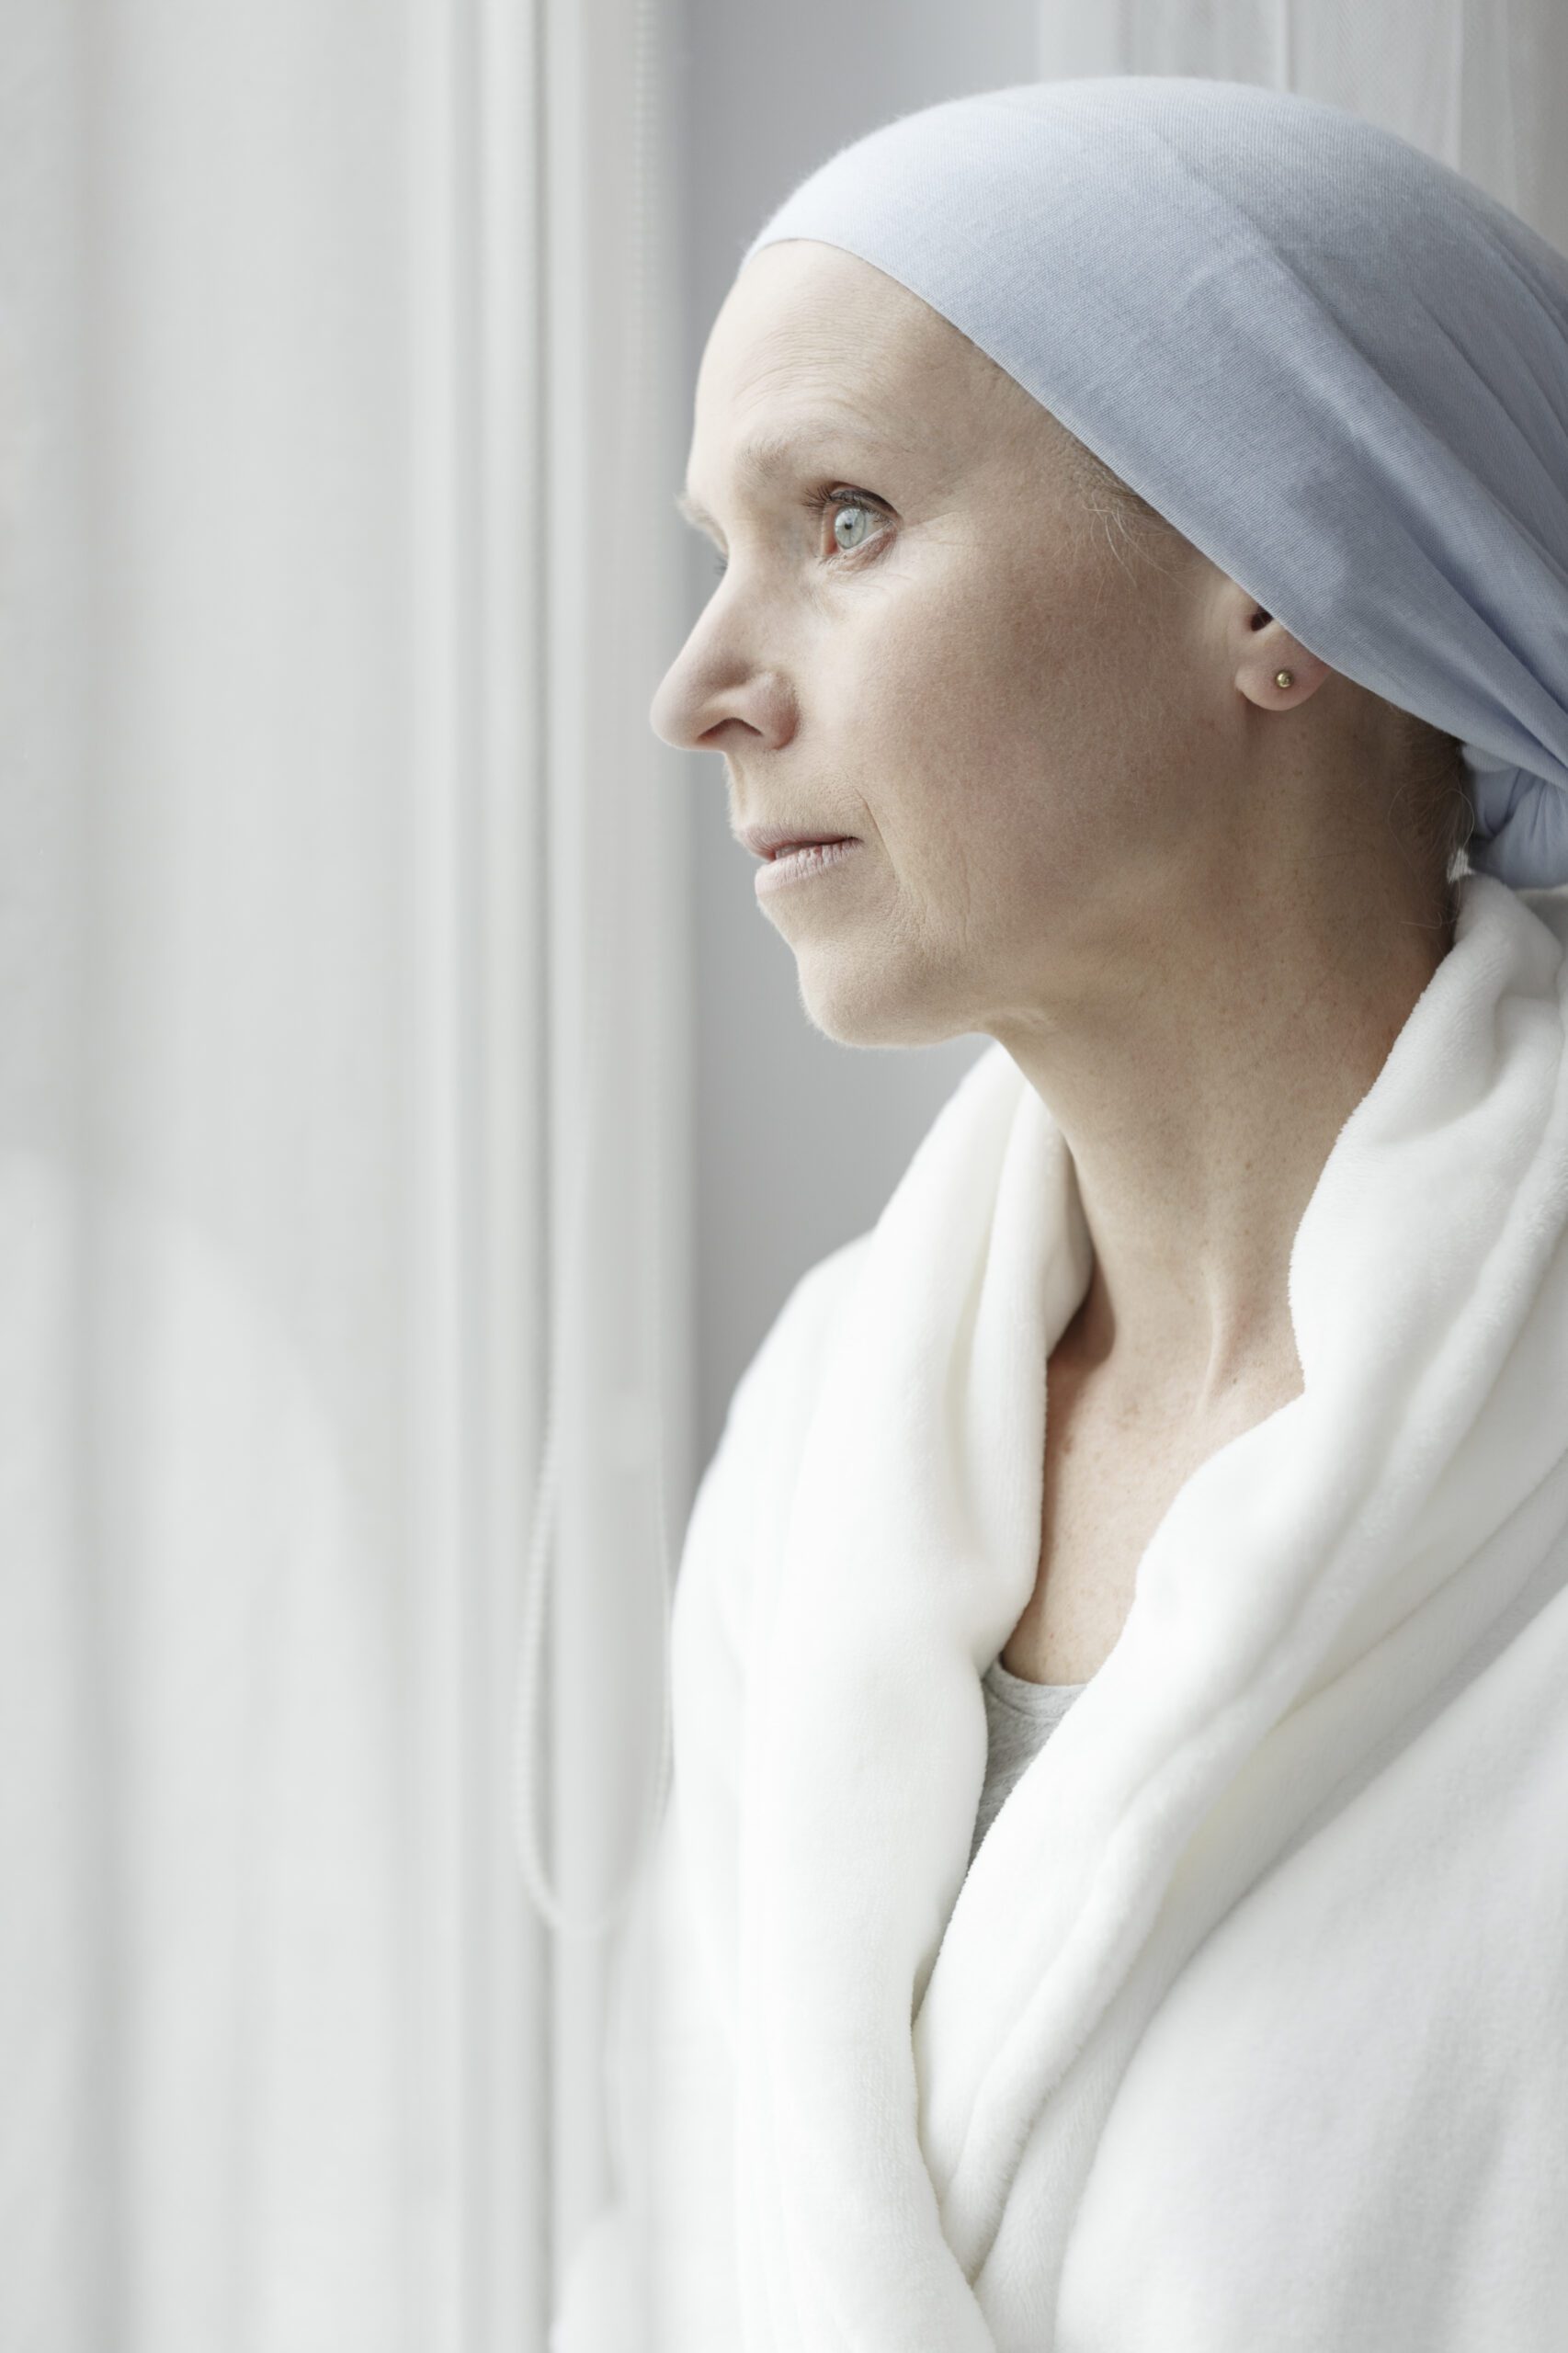 woman with cancer